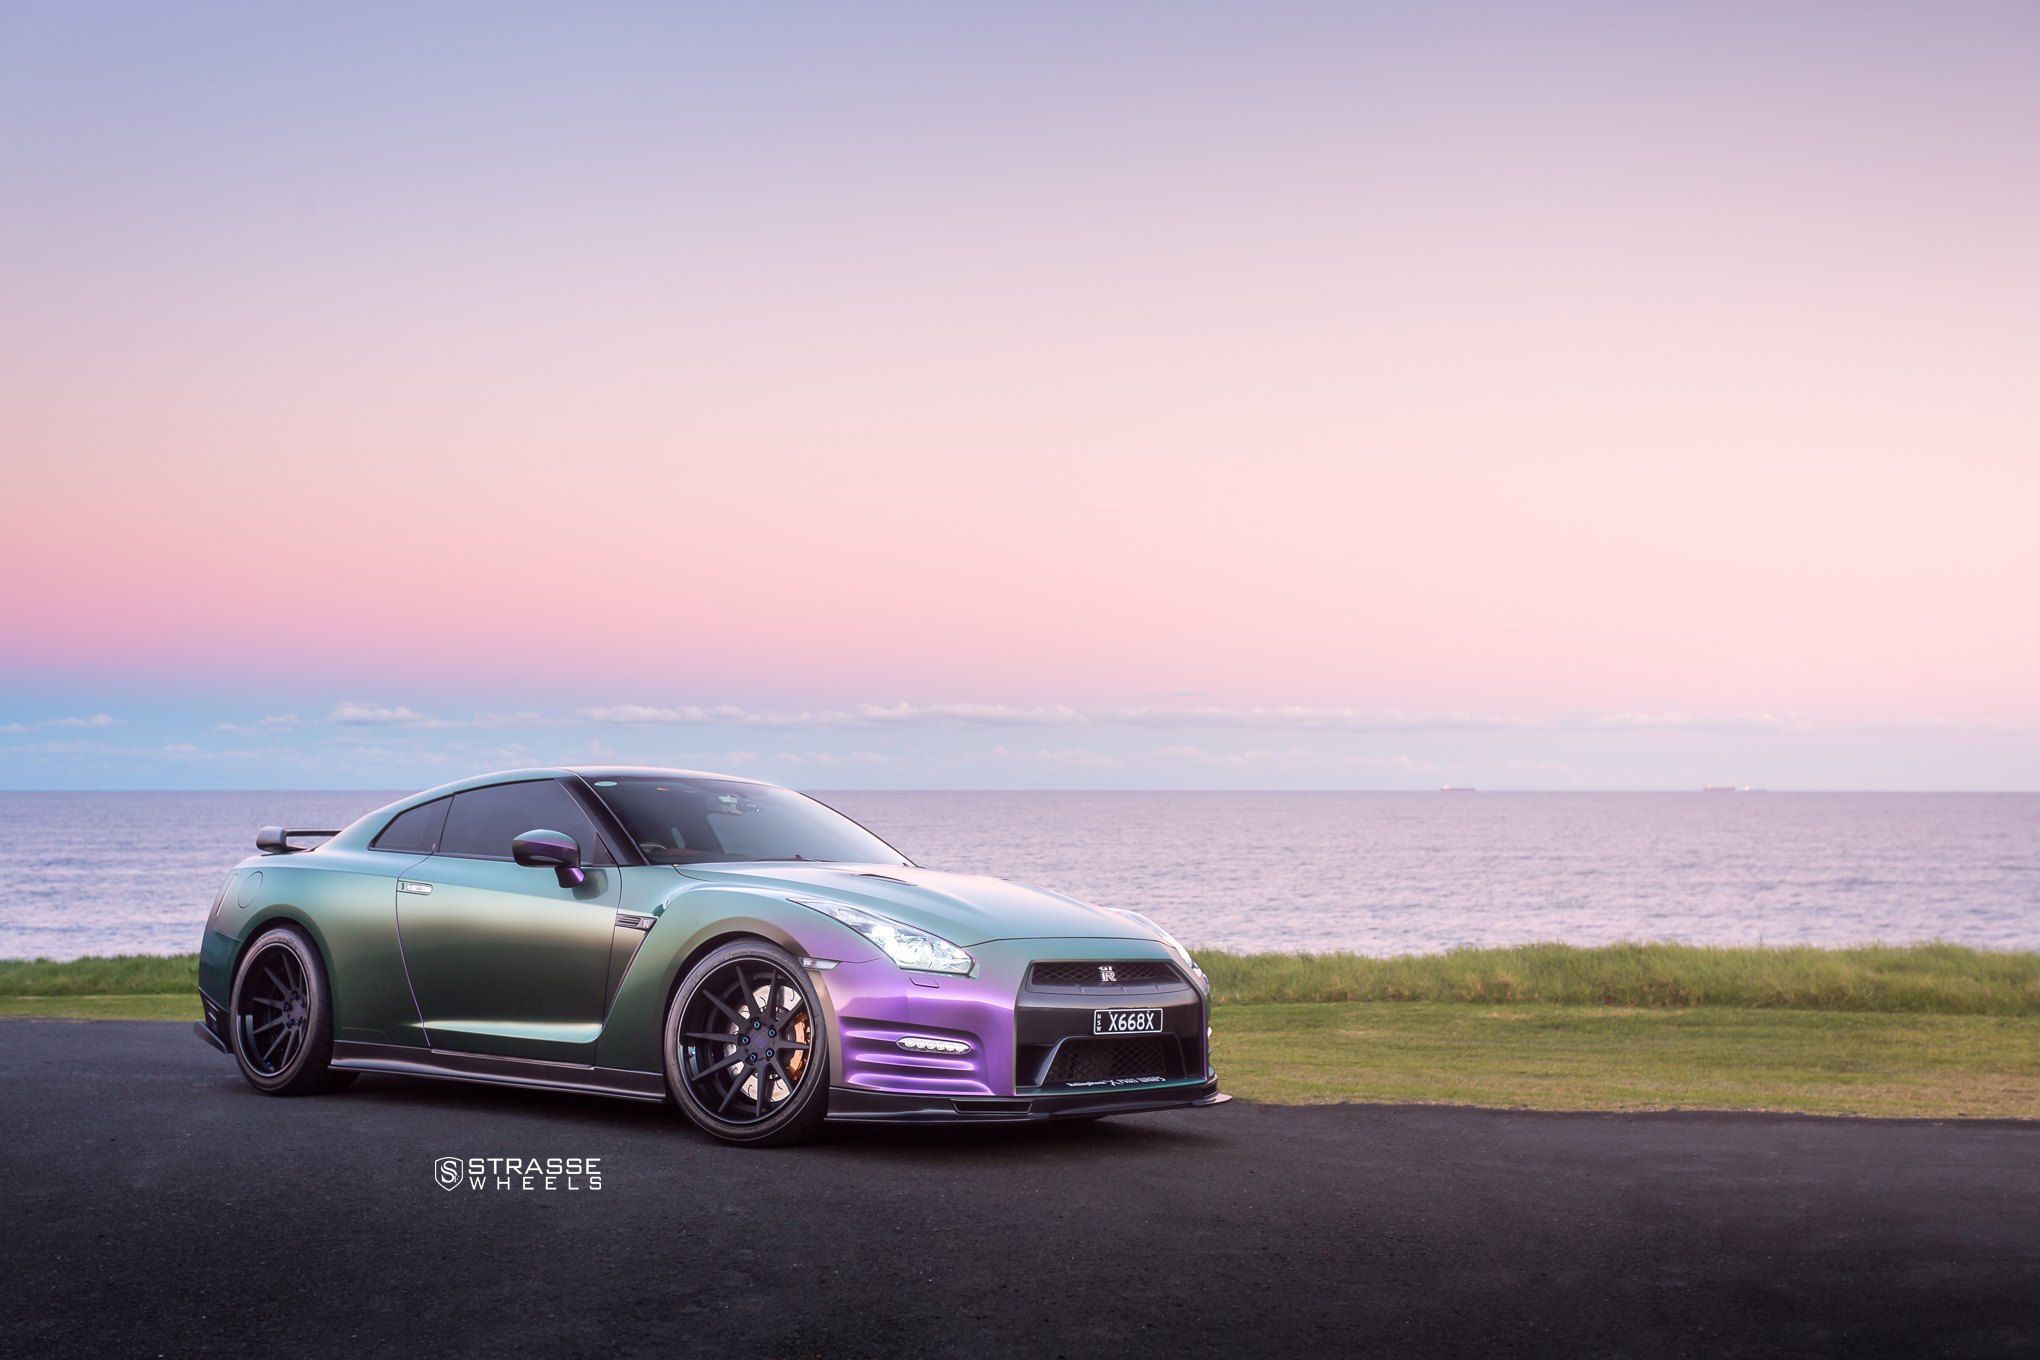 Aftermarket Side Skirts on Chameleon Green Nissan GT-R - Photo by Strasse Forged